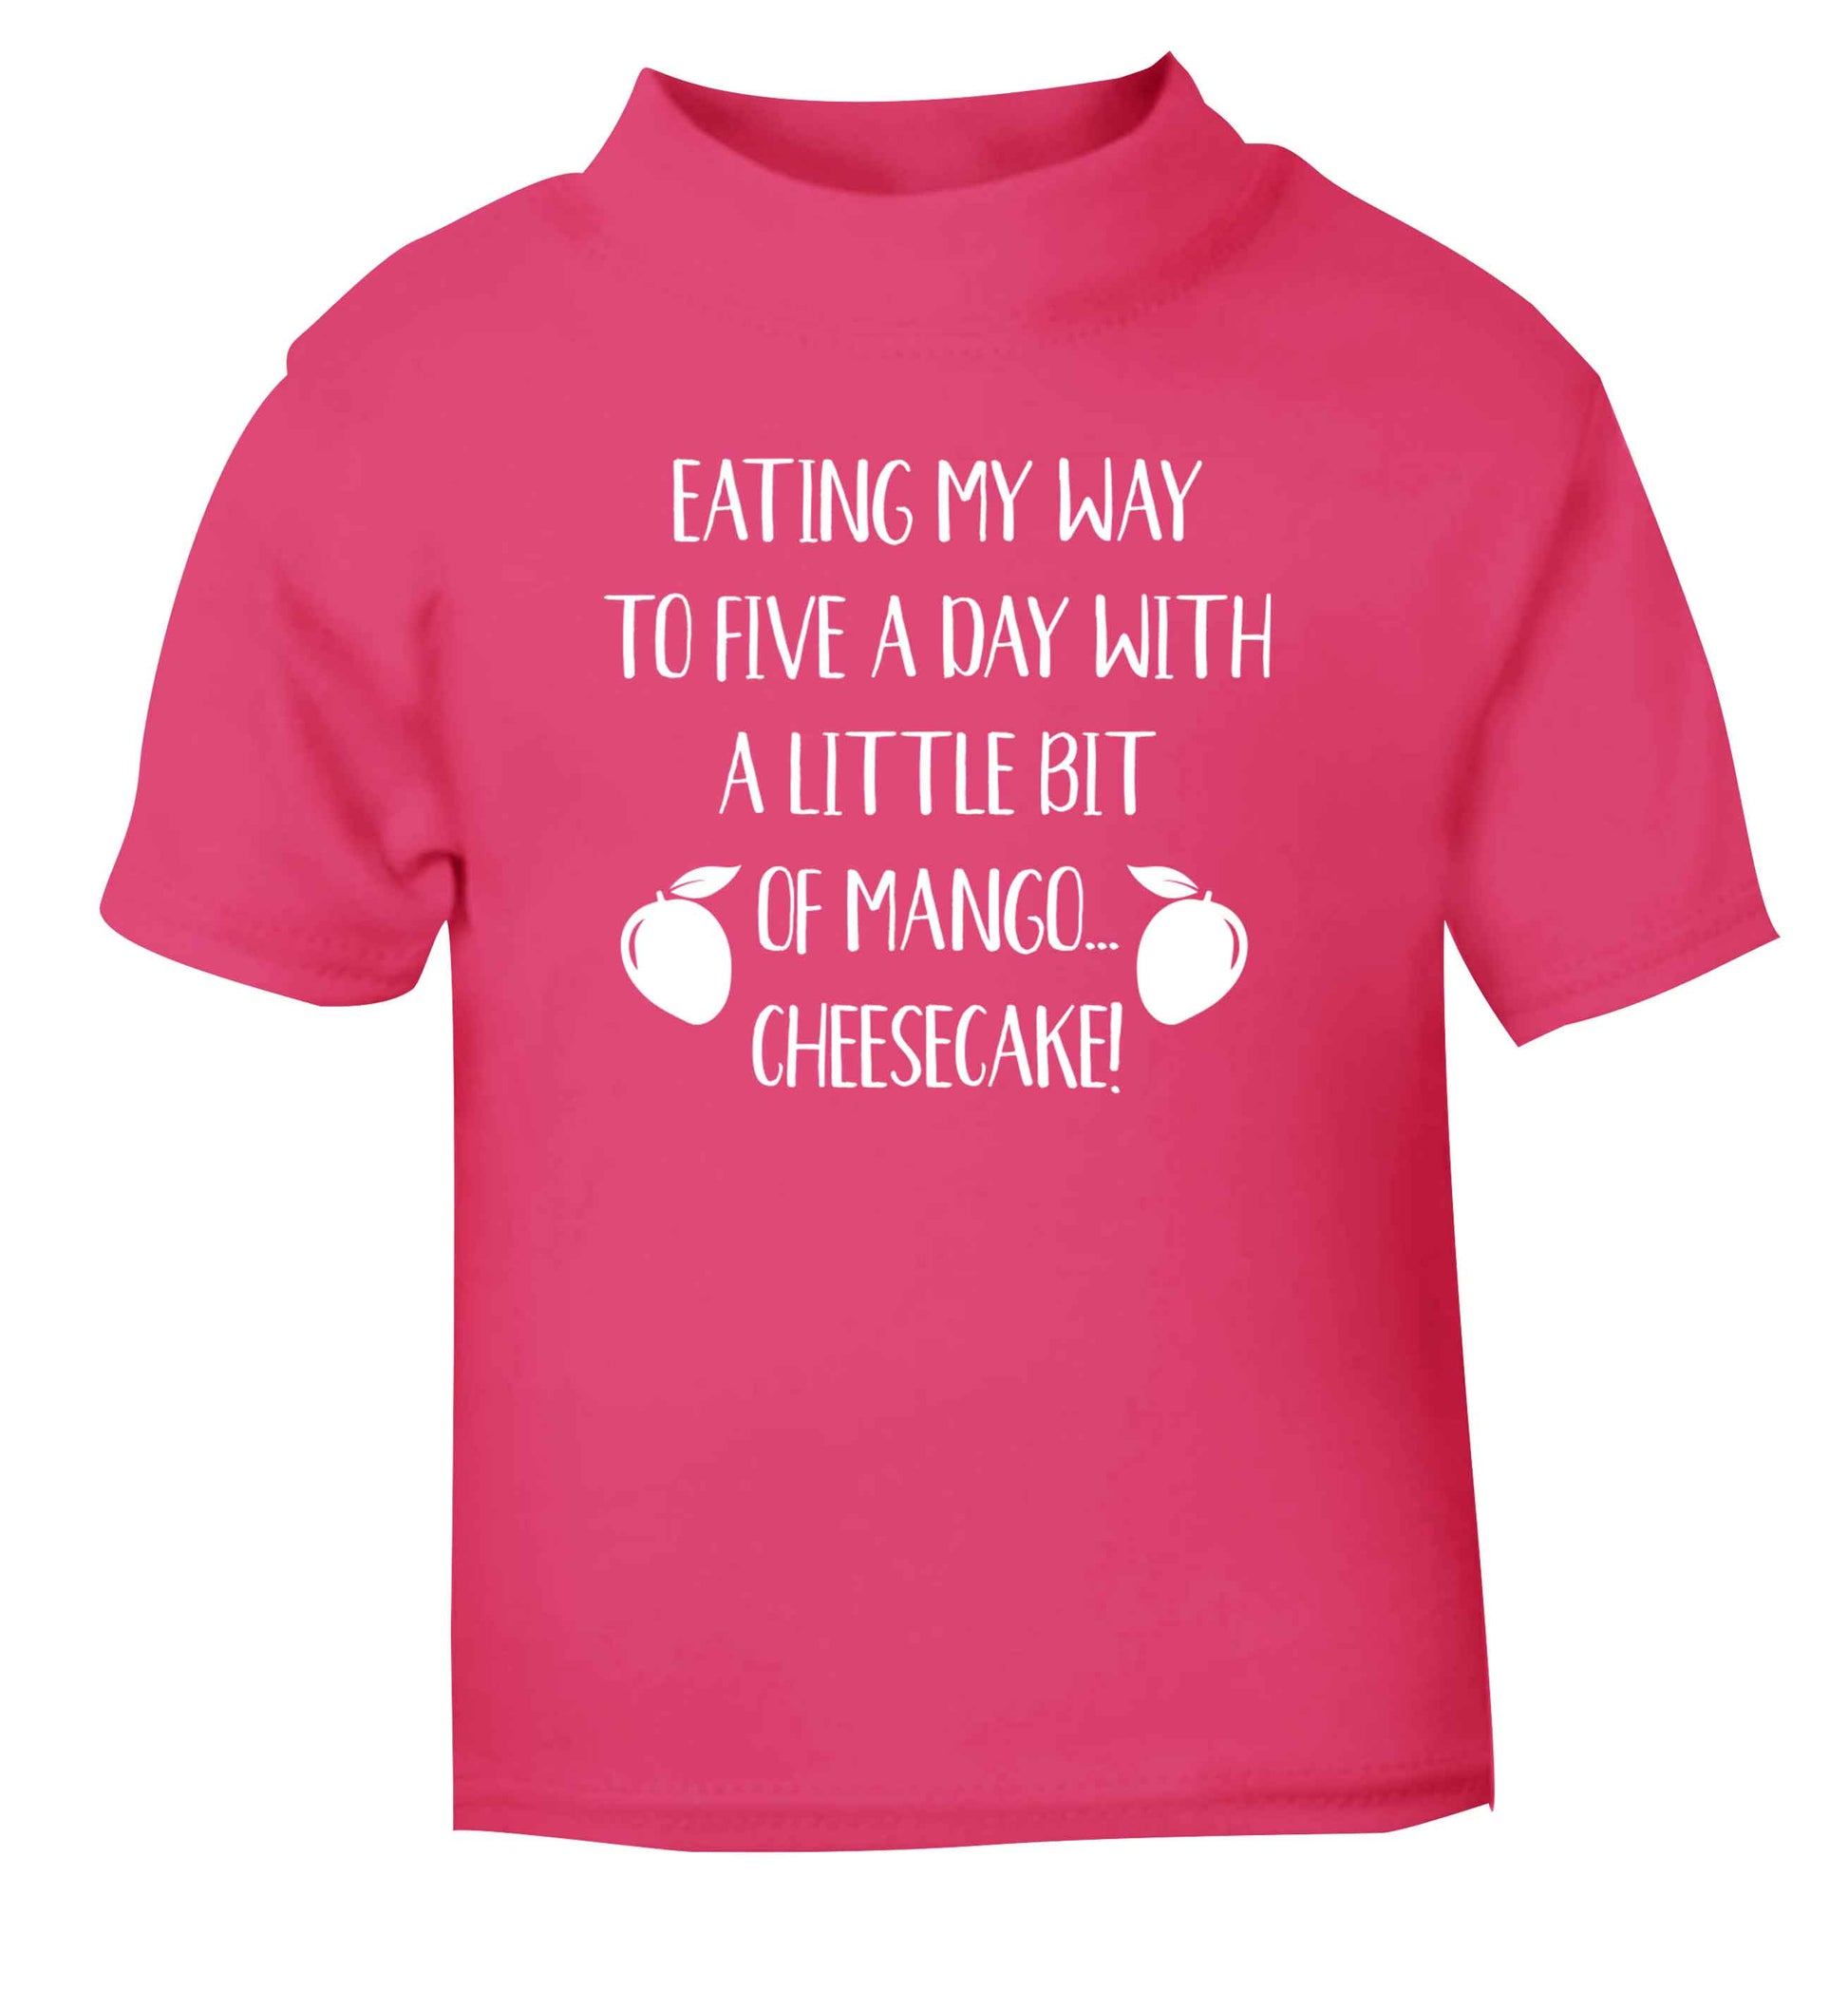 Eating my way to five a day with a little bit of mango cheesecake pink Baby Toddler Tshirt 2 Years